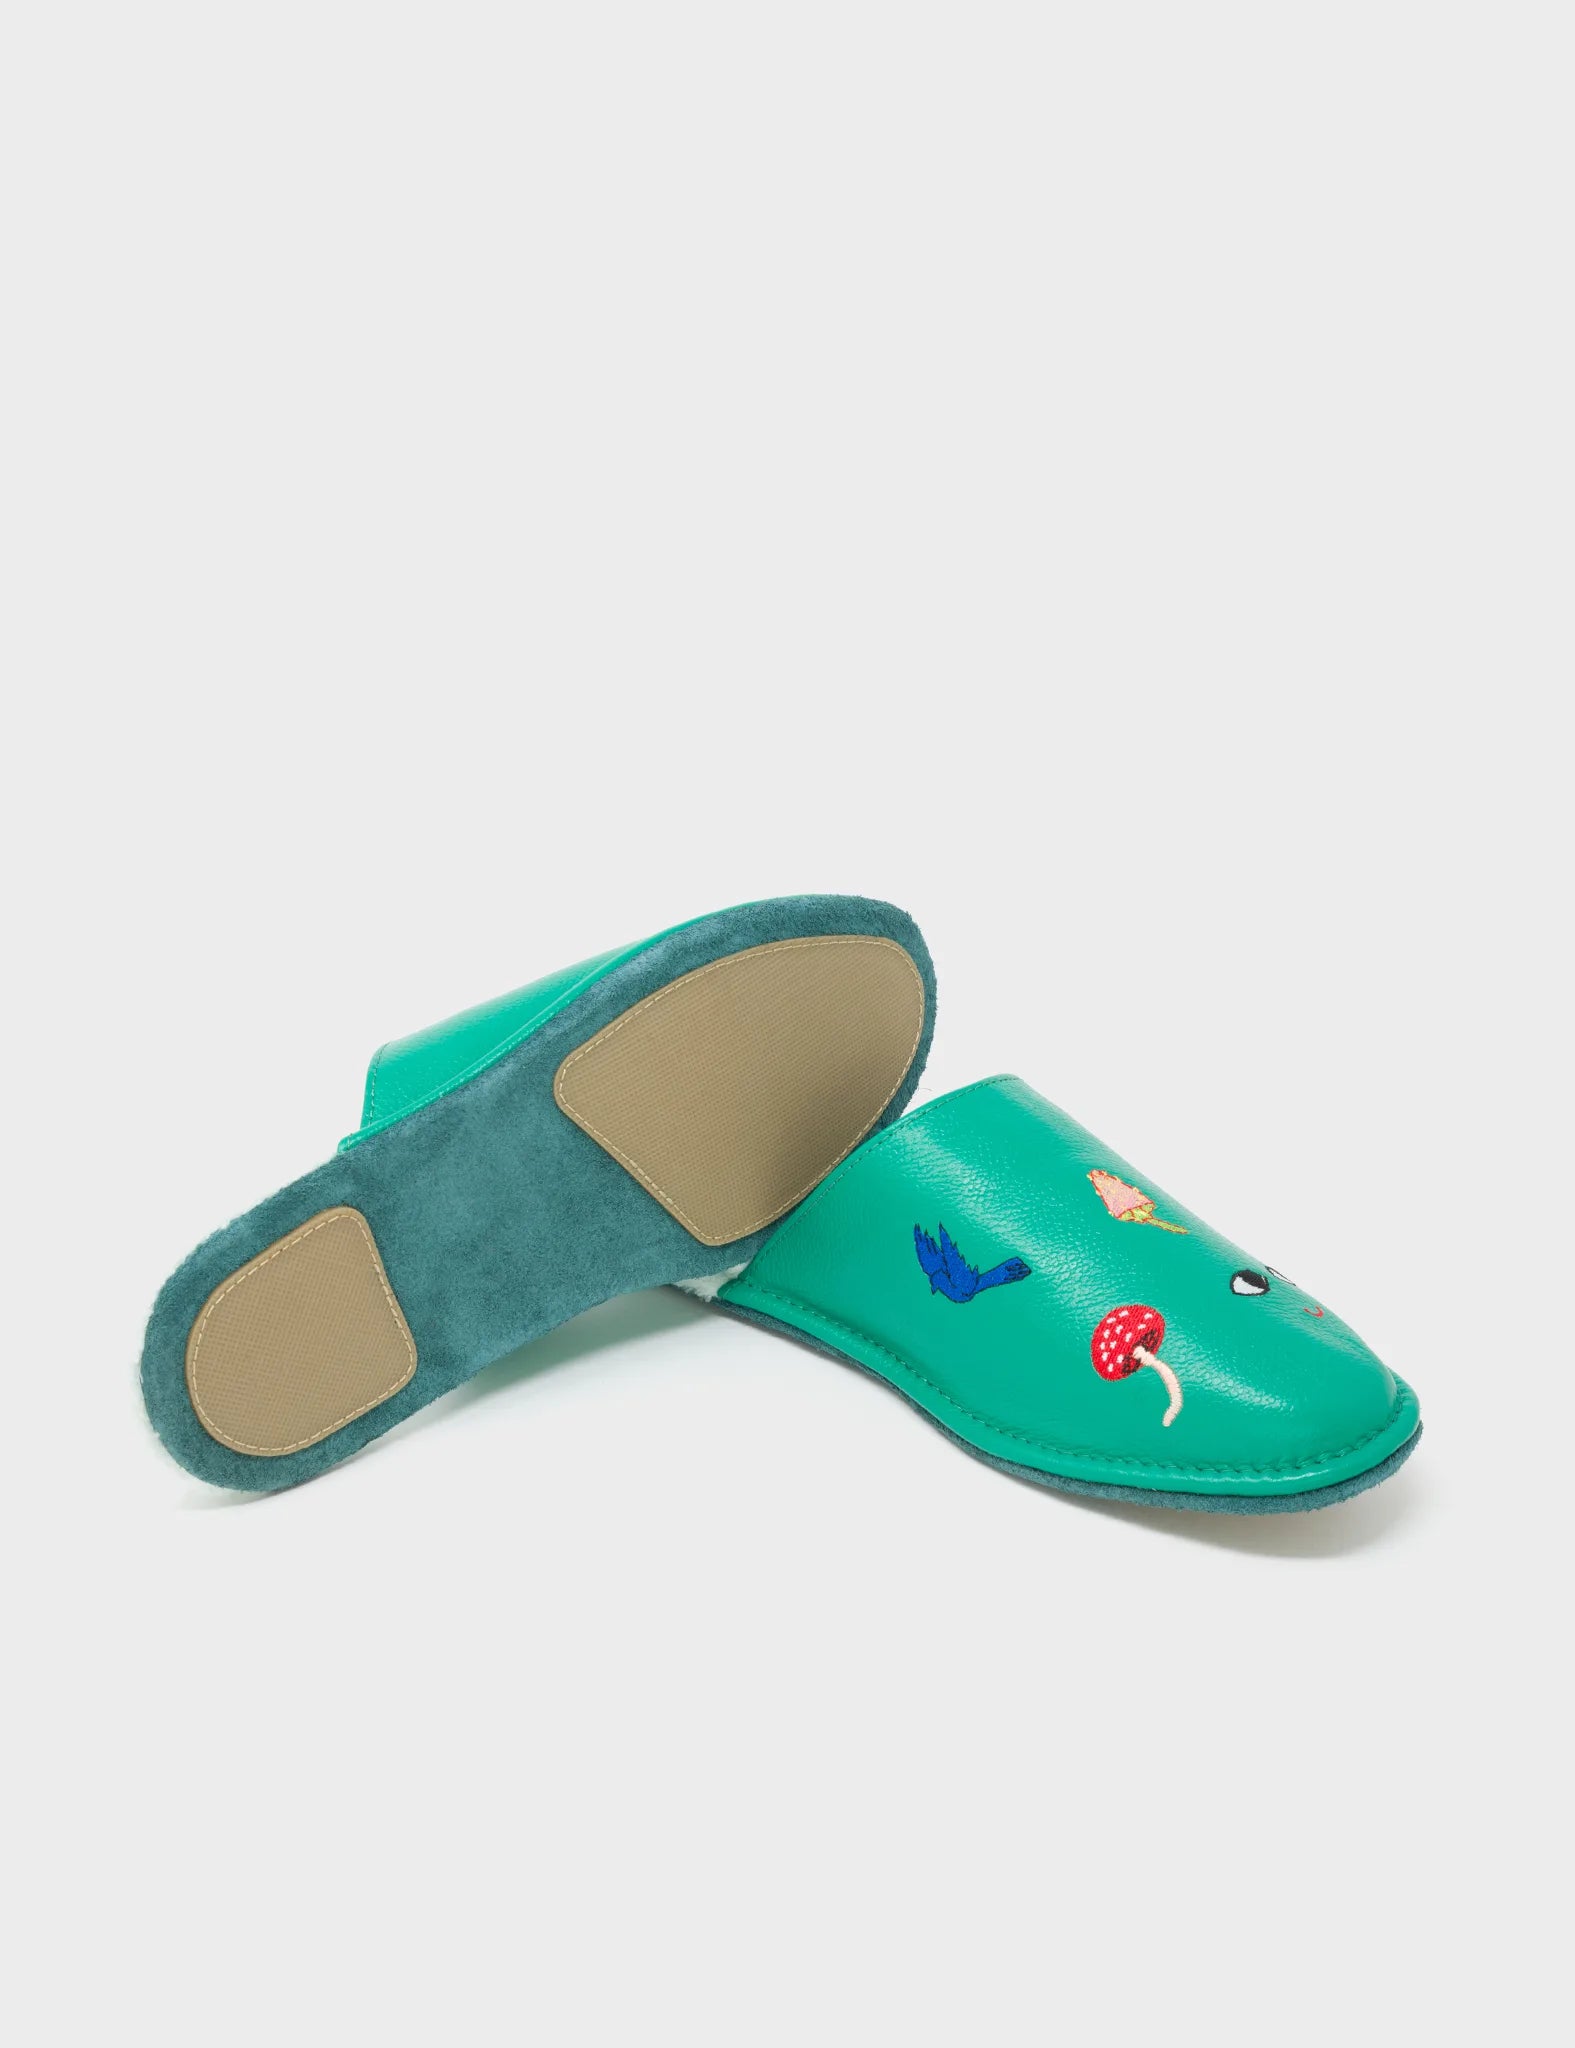 Deep Green Leather Slippers - Fungi, Birds & Smiley Face Embroidery - Bottom 